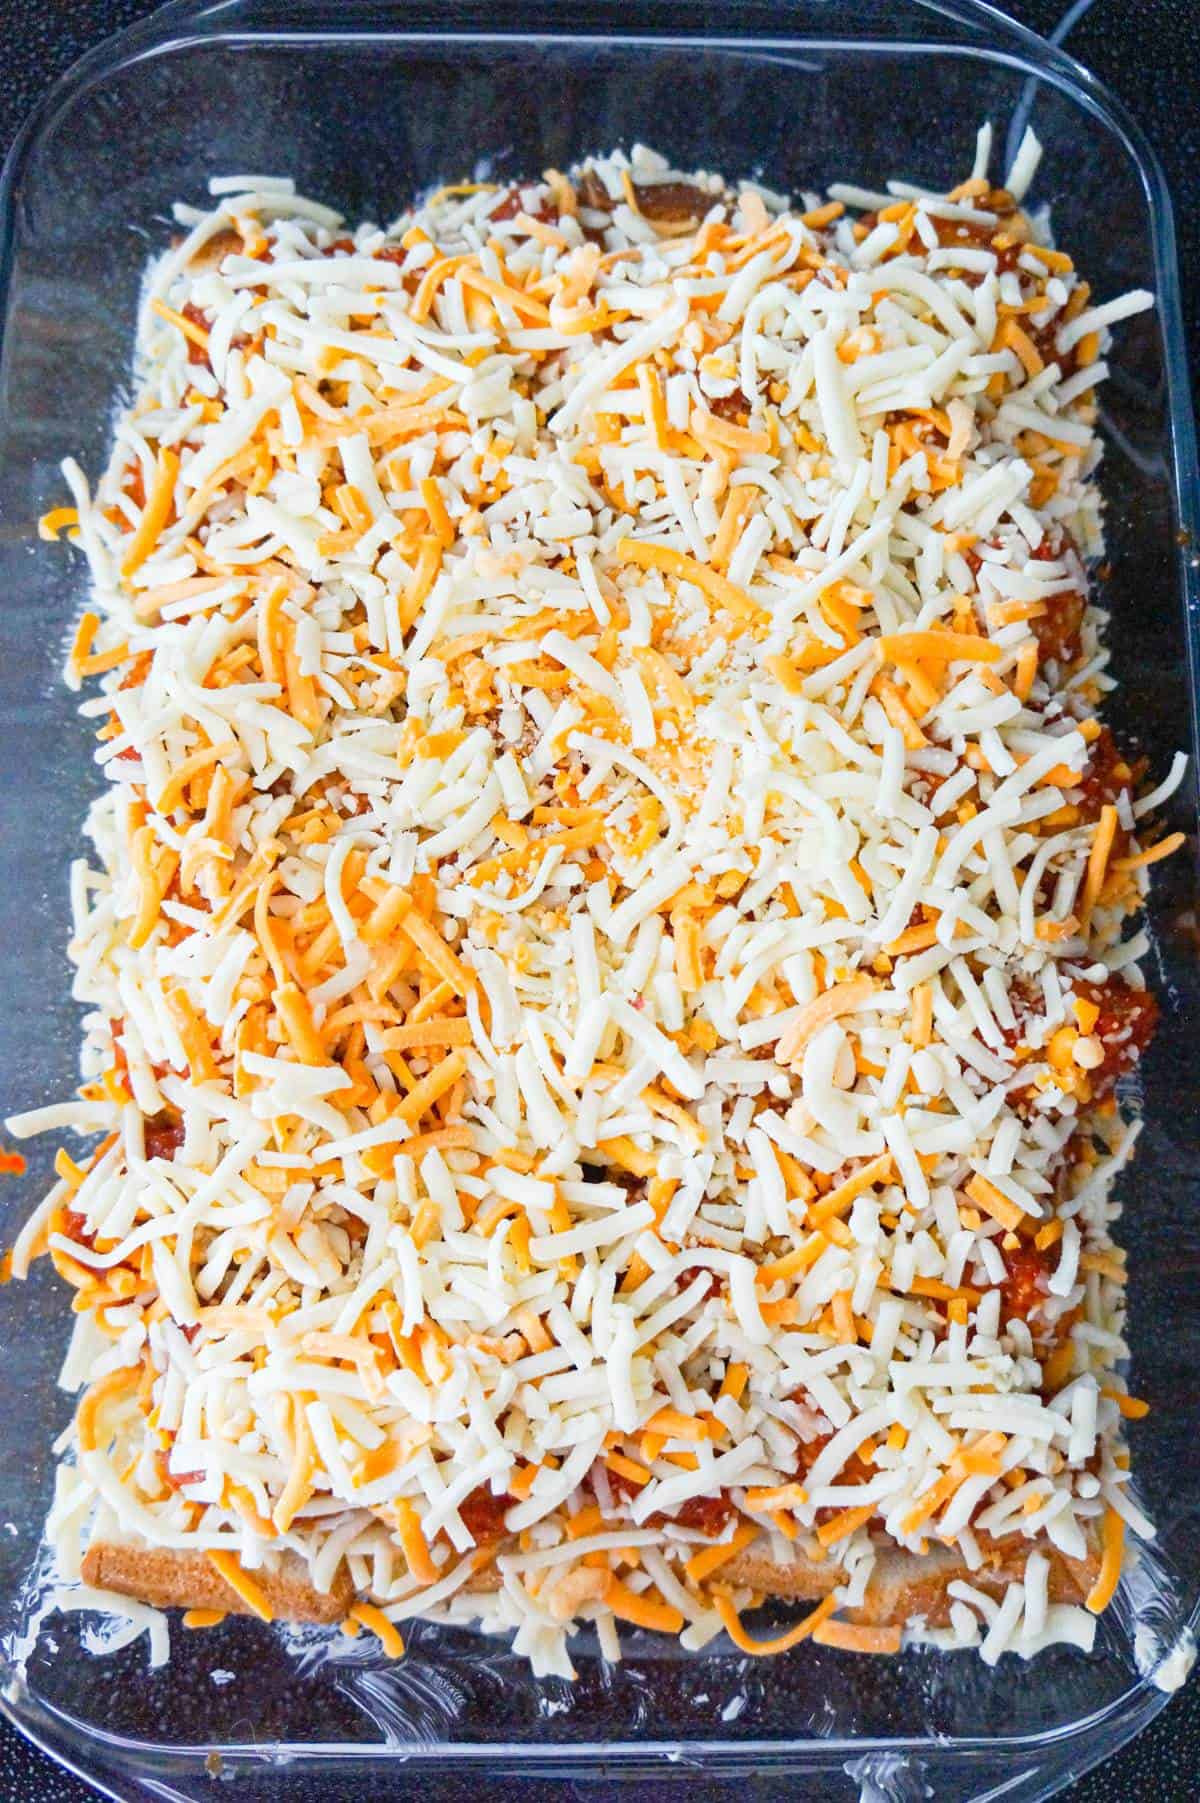 shredded mozzarella and cheddar cheese on top of meatball casserole in a baking dish